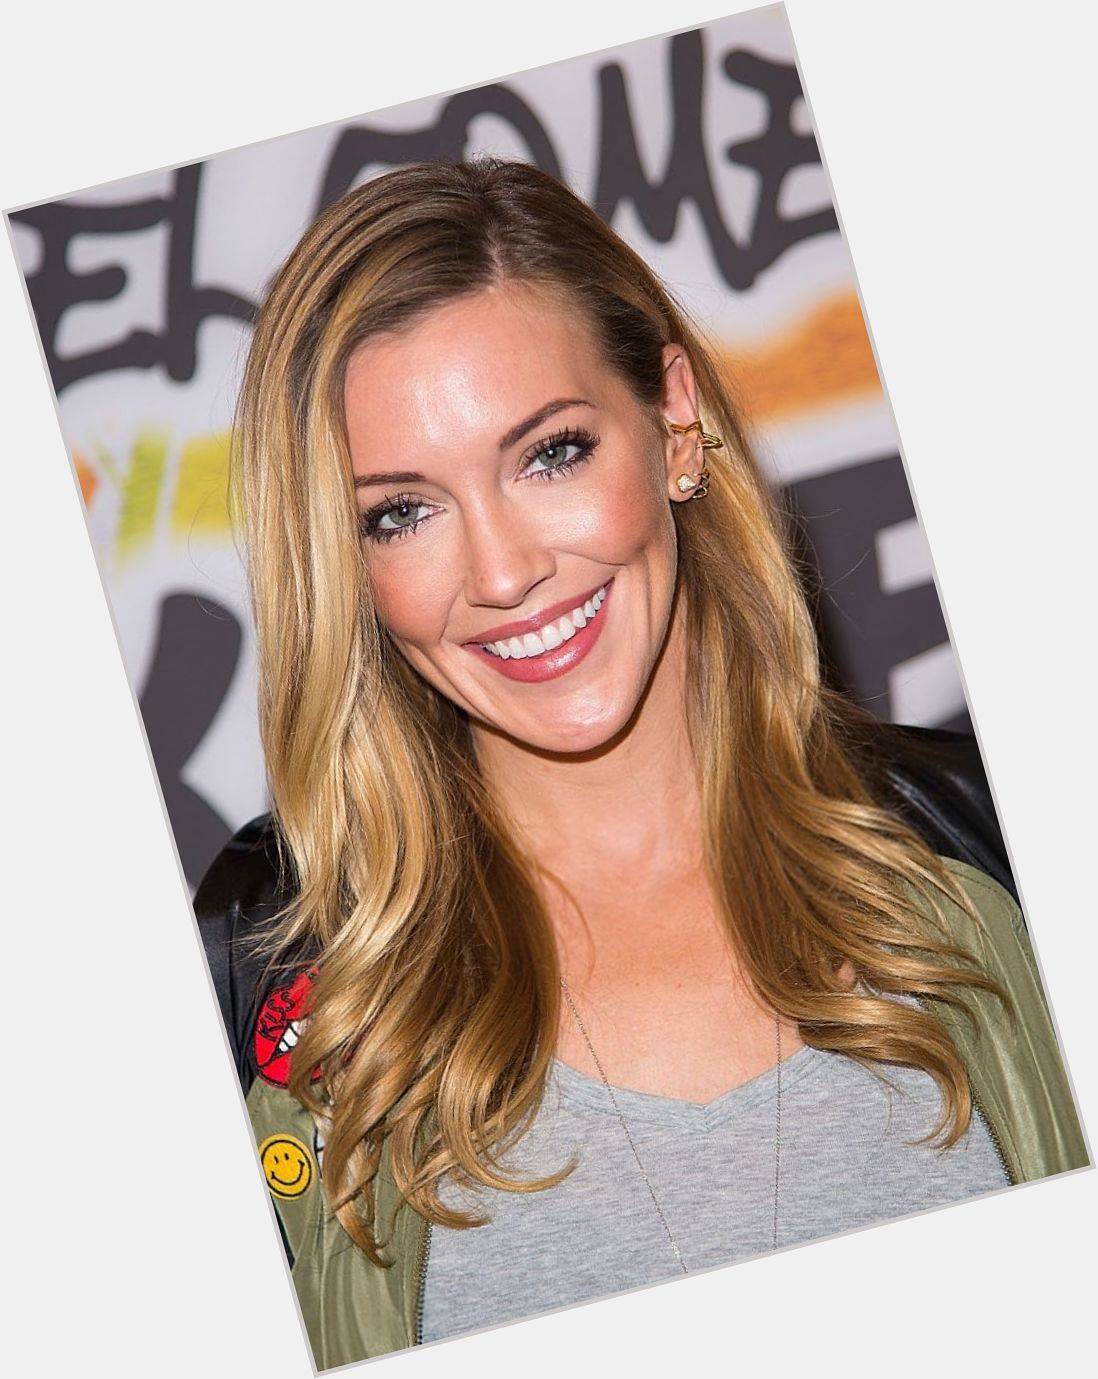 HAPPY BIRTHDAY KATIE CASSIDY RODGERS      I hope you are having a wonderful week this week!        